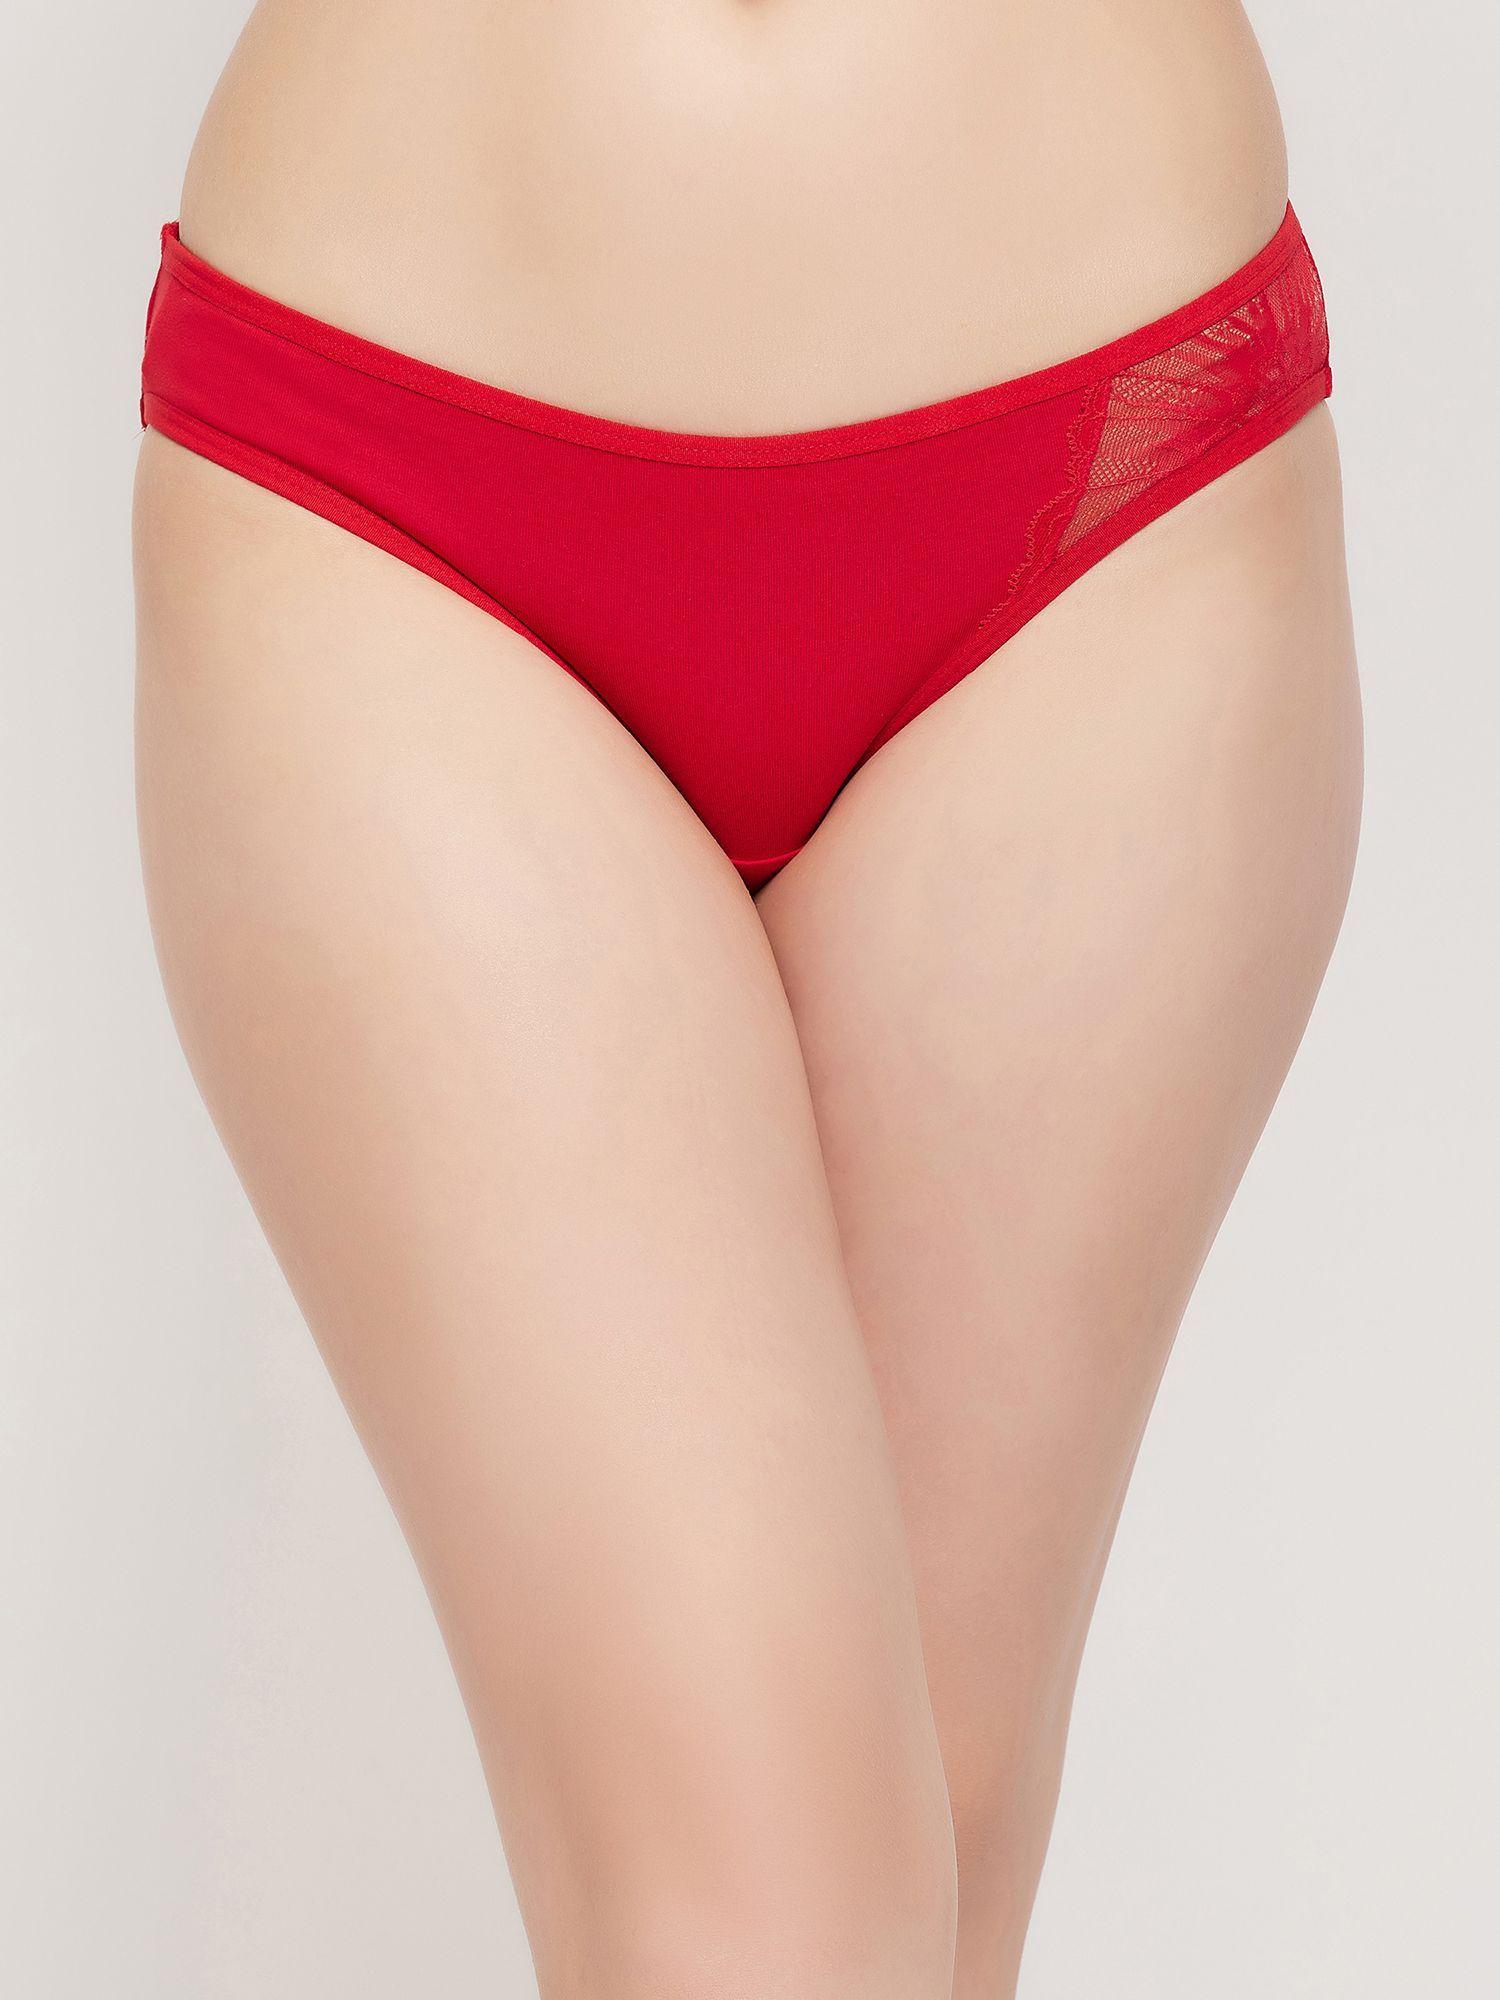 low waist bikini panty in red with lace inserts - cotton